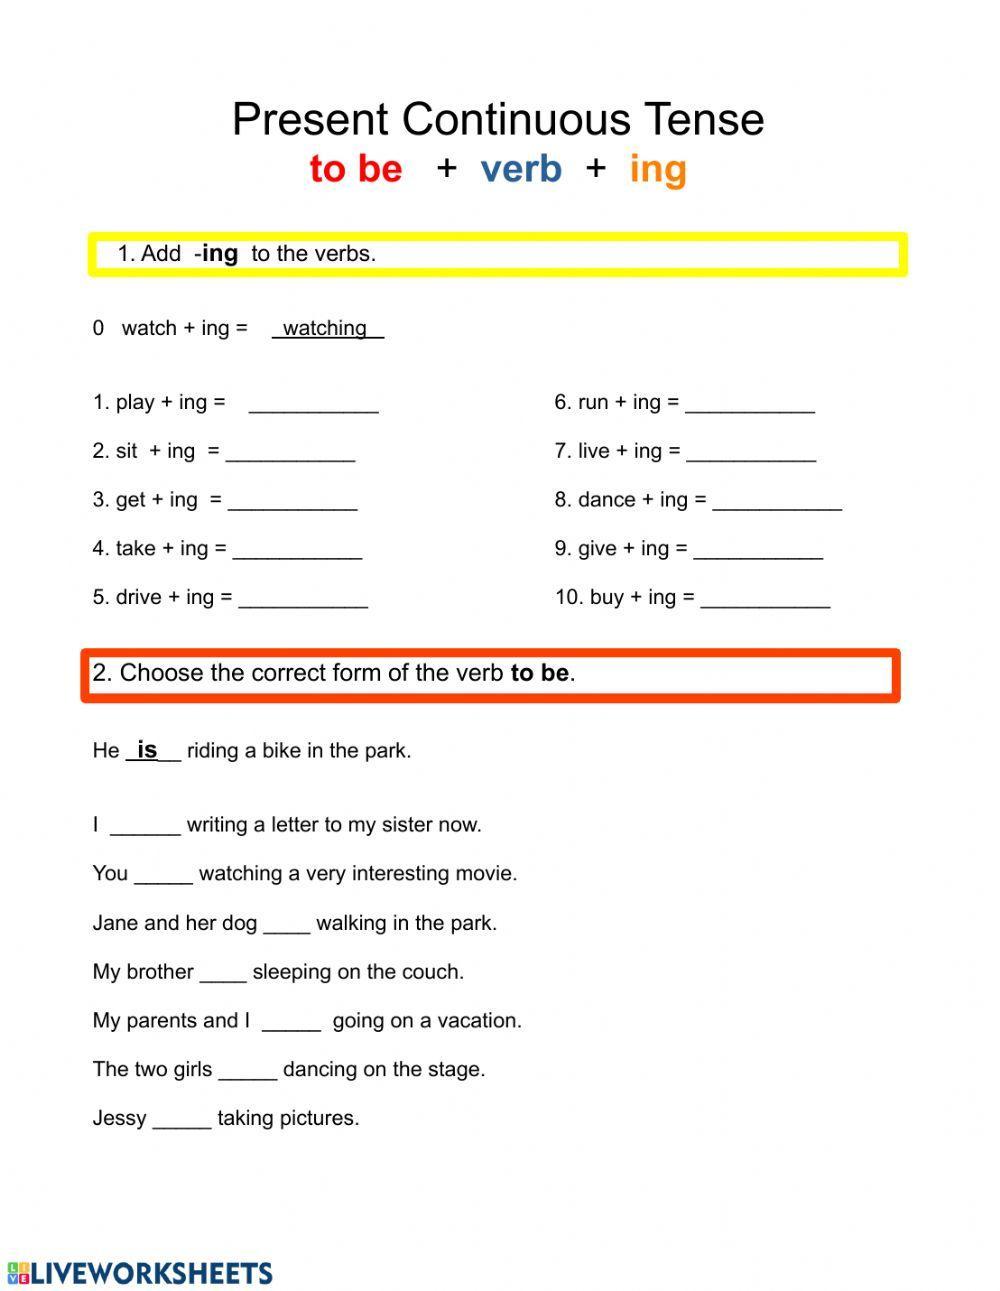 Present Continuous Tense online exercise | Live Worksheets